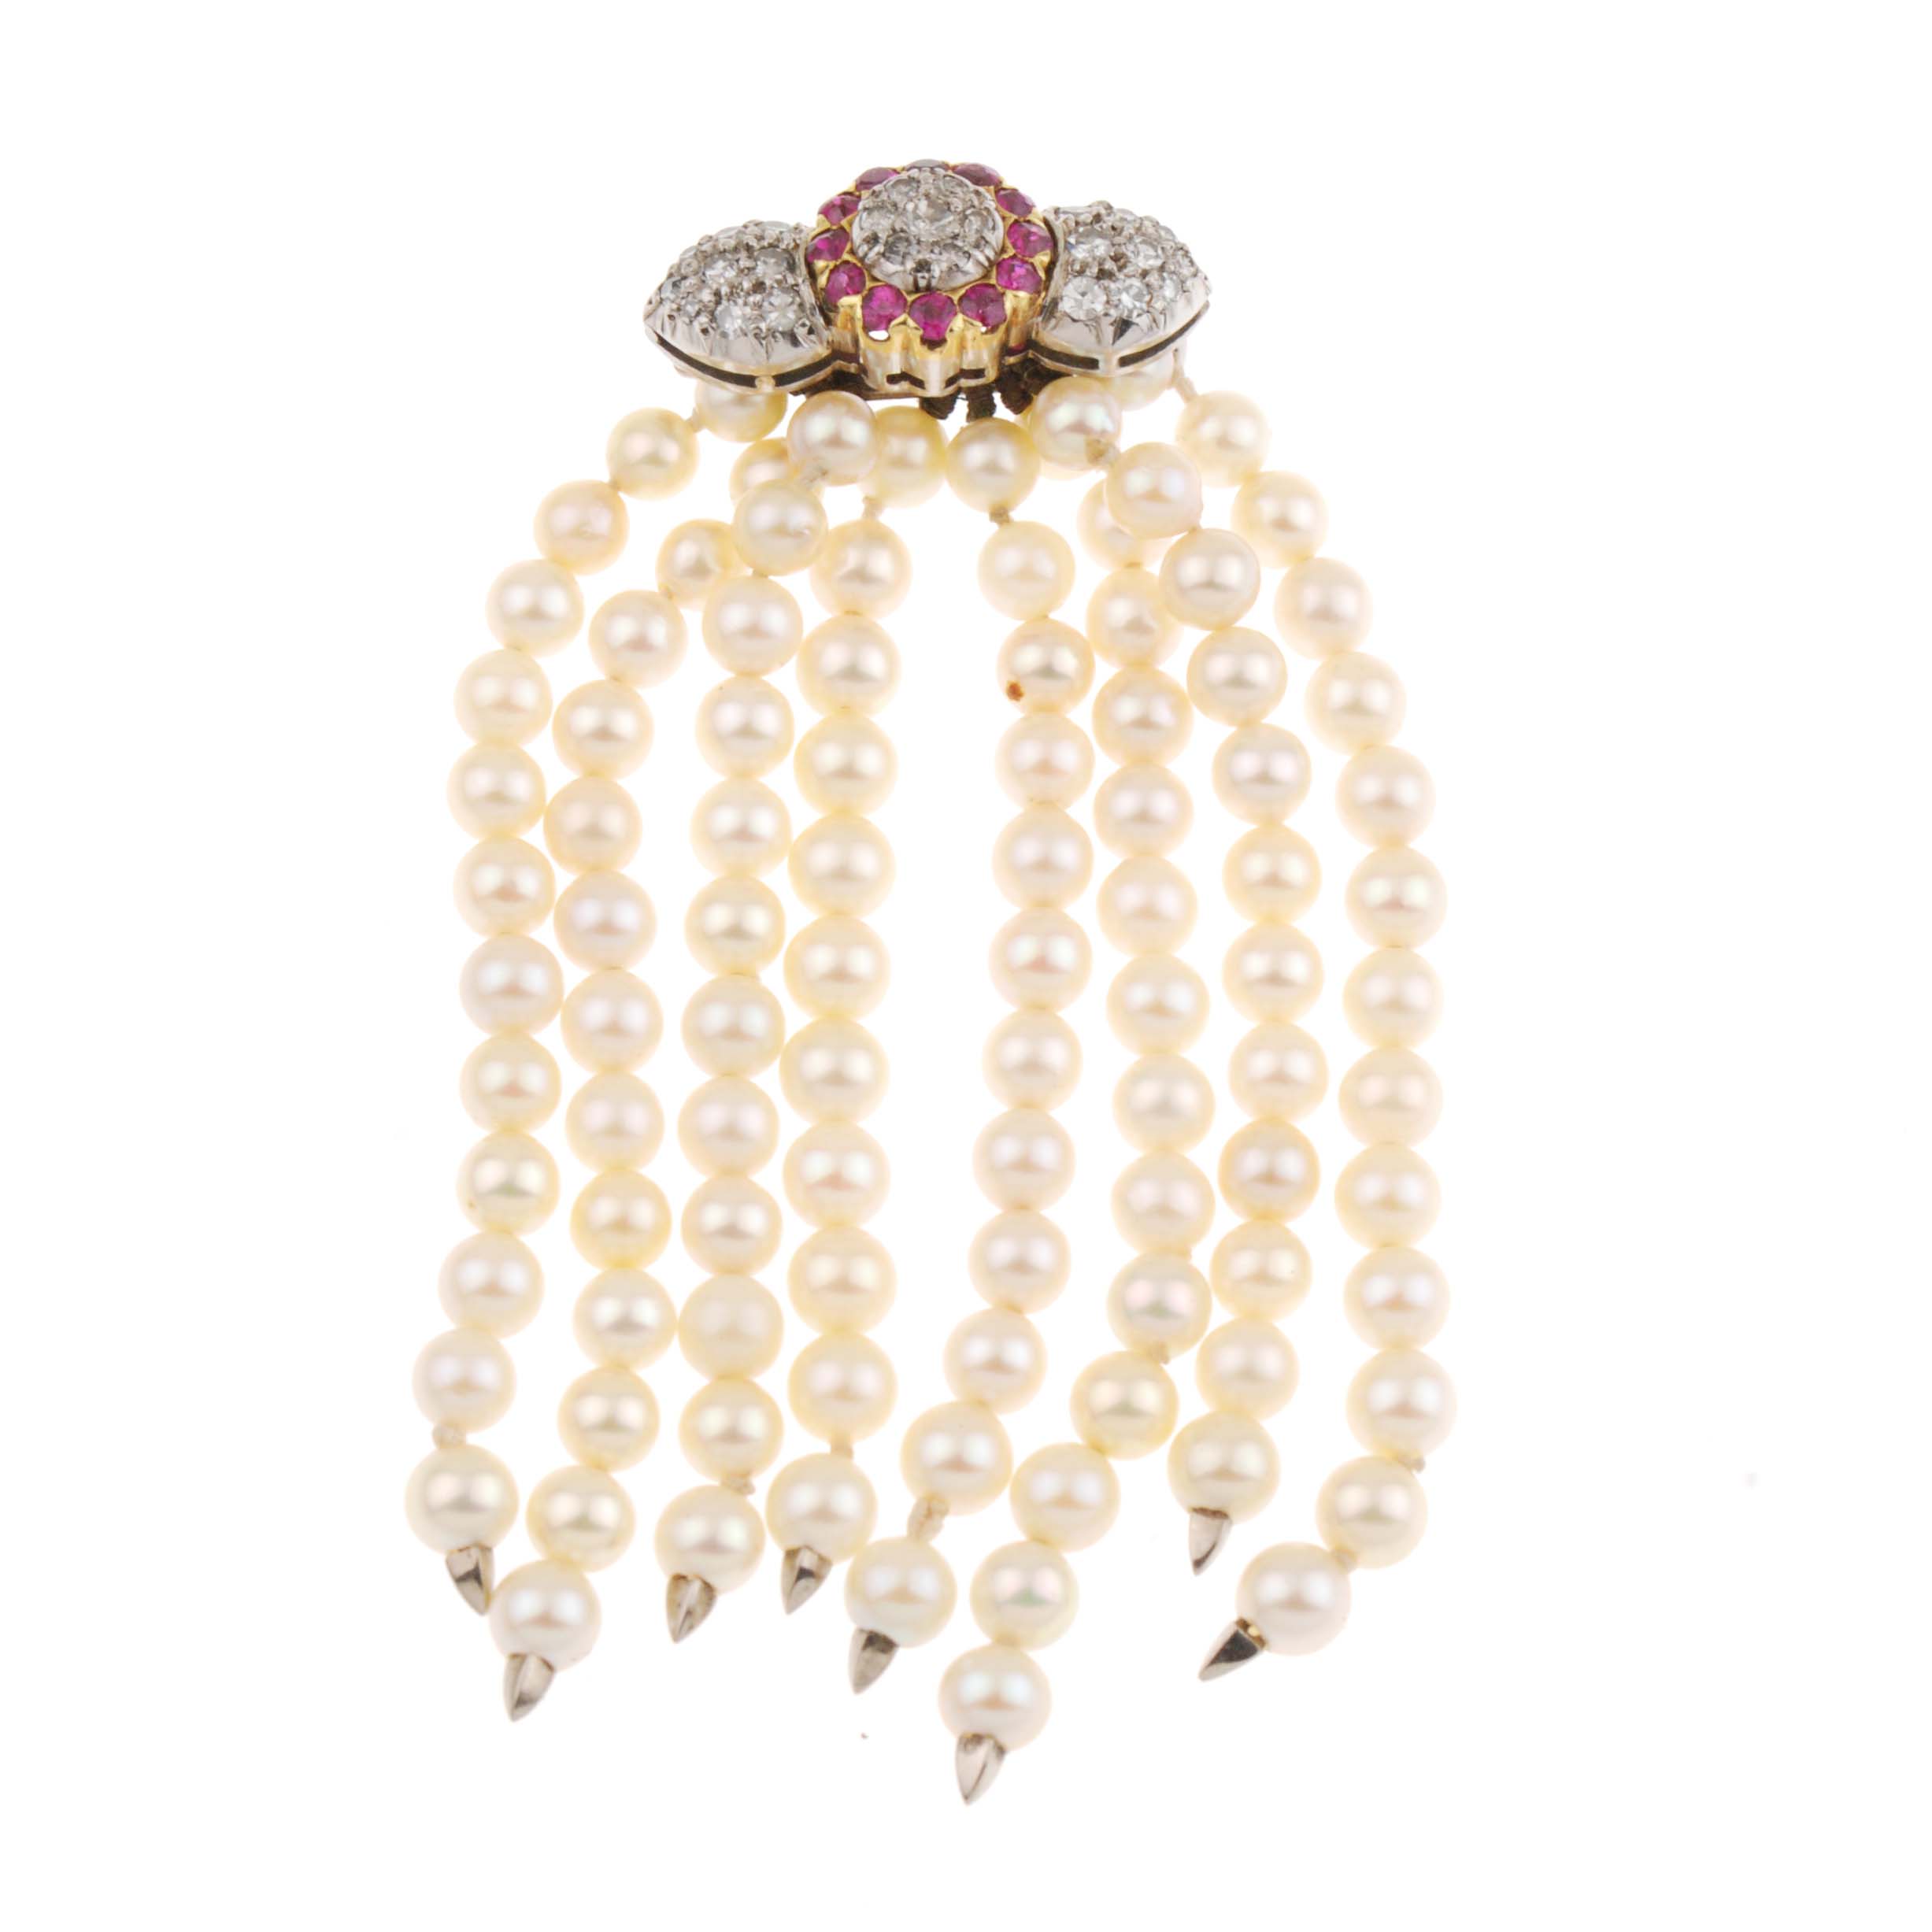 BROOCH WITH STRINGS OF HANGING PEARLS.